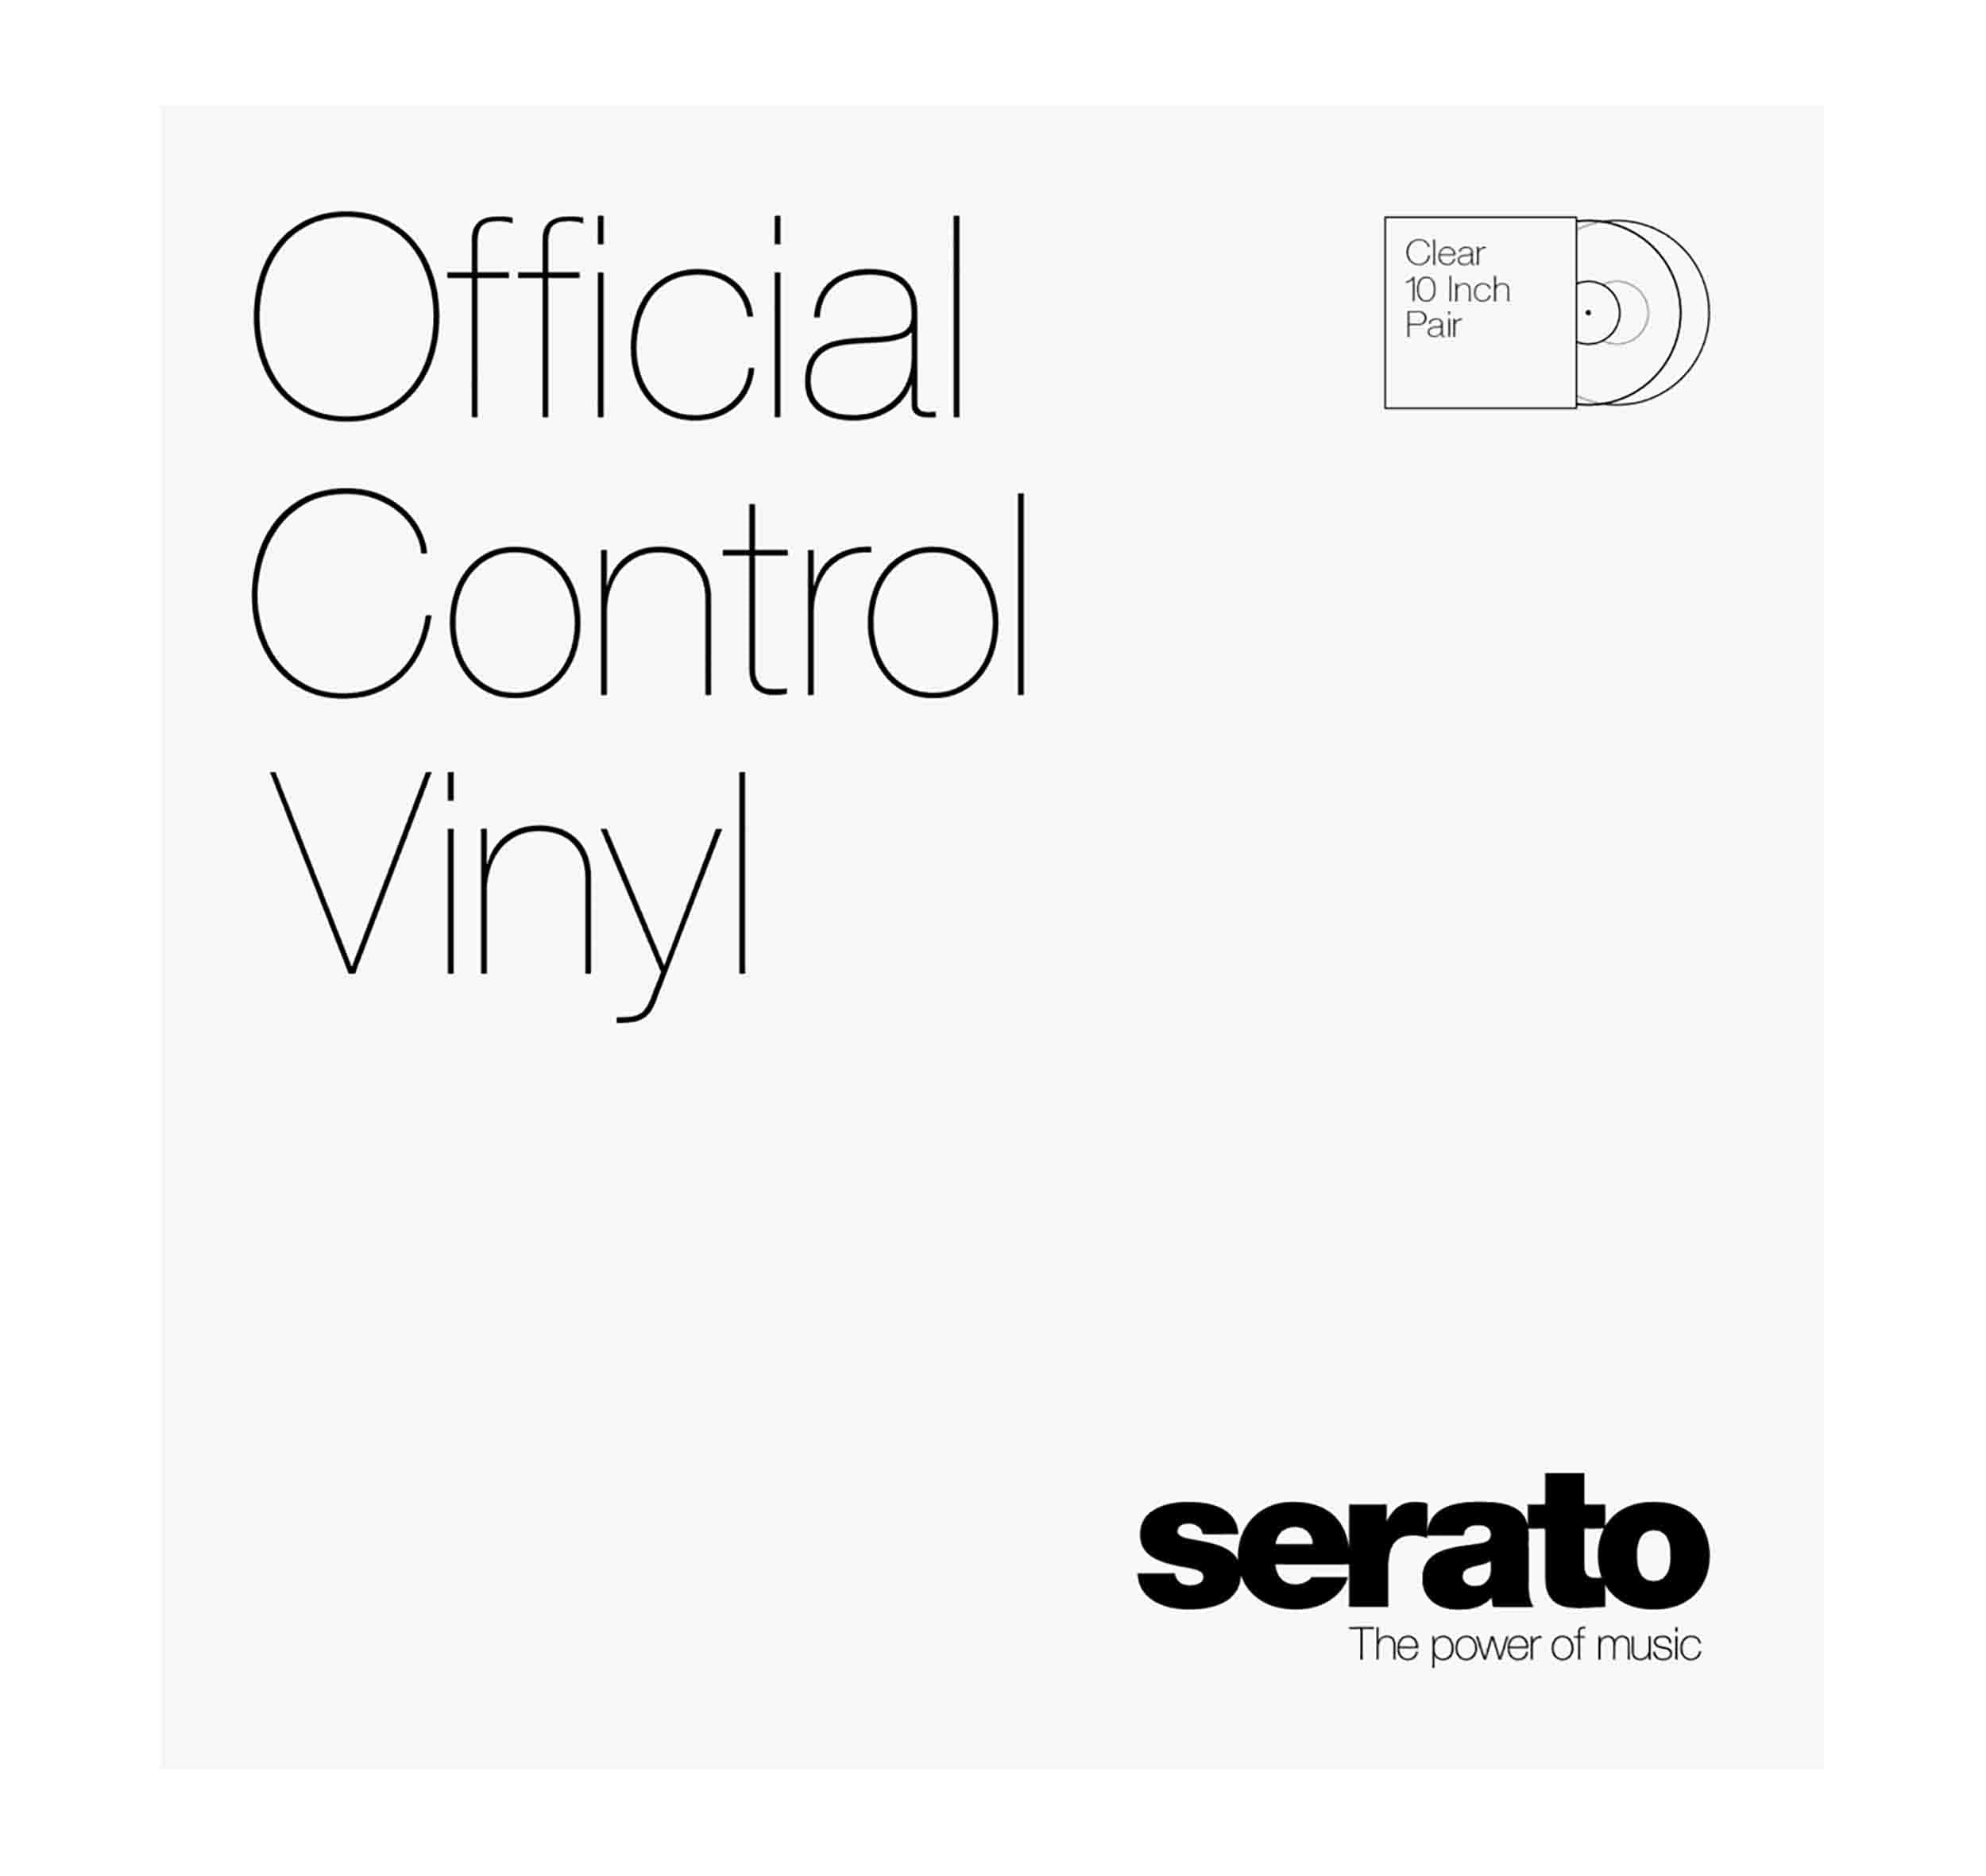 Serato SCV-PS-CLE-10, 10" Control Vinyl (Pair, Clear) - Hollywood DJ